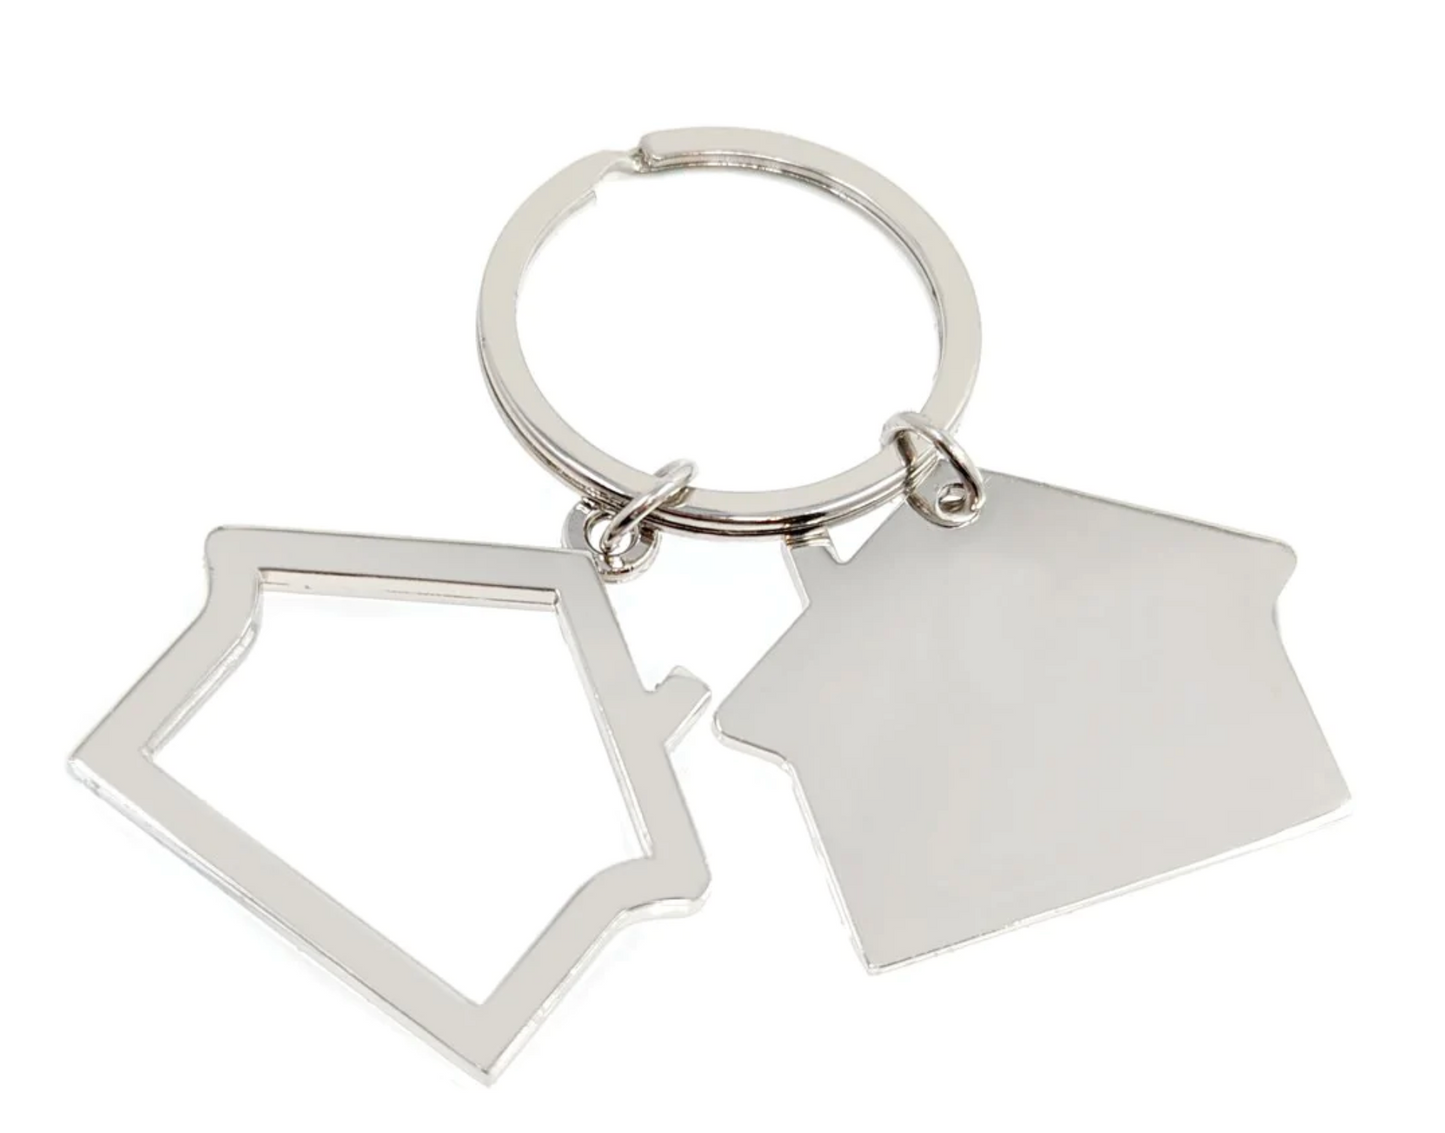 Key Ring Key Chain 2 Houses Metal 1 House solid 1 House is an outline (HRING)